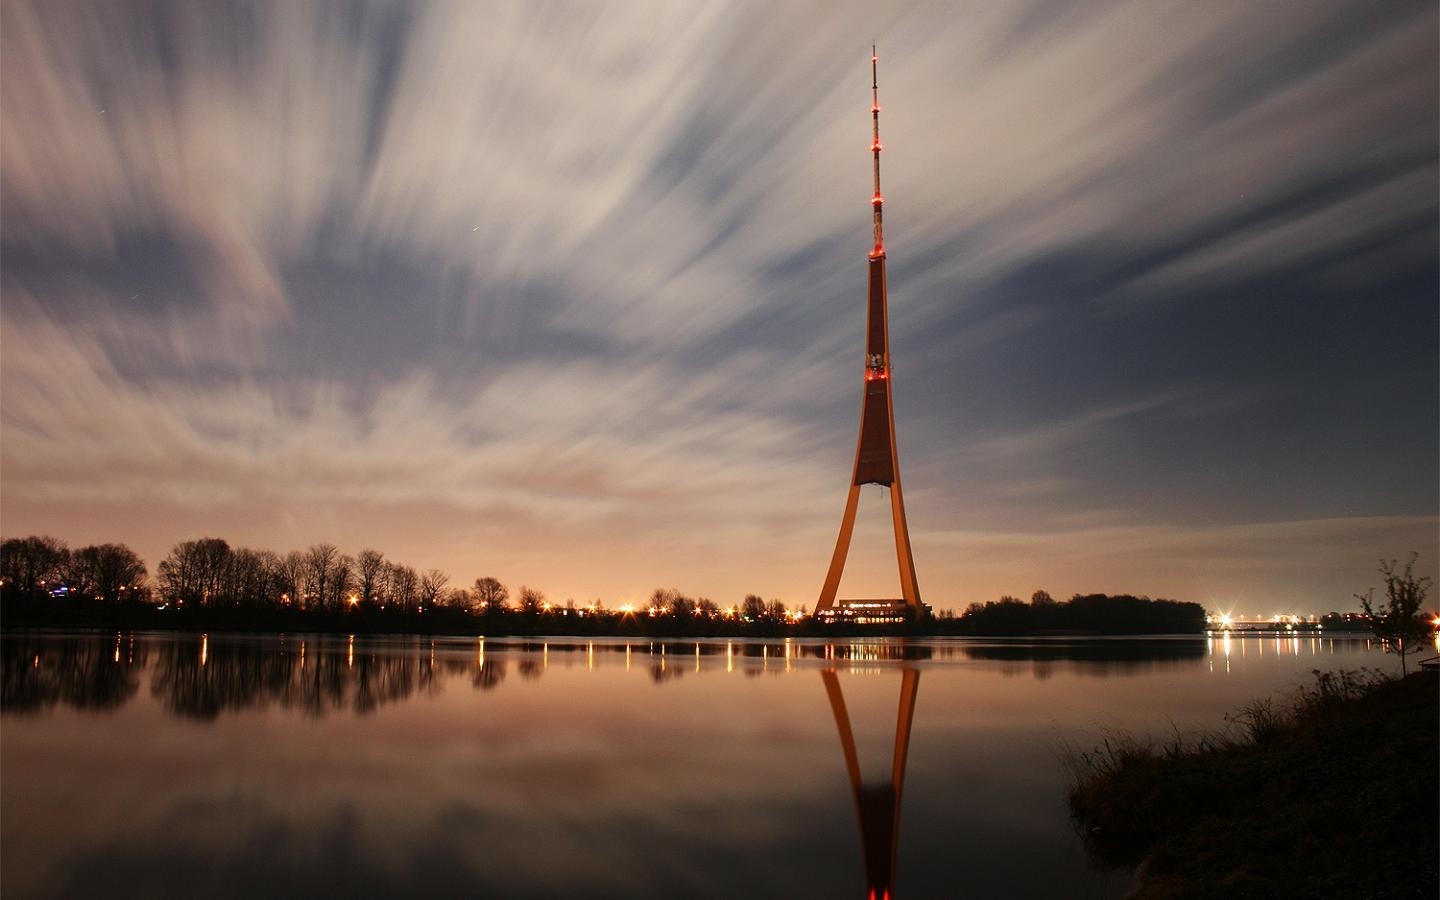 General 1440x900 tower Latvia reflection lake water construction sky outdoors